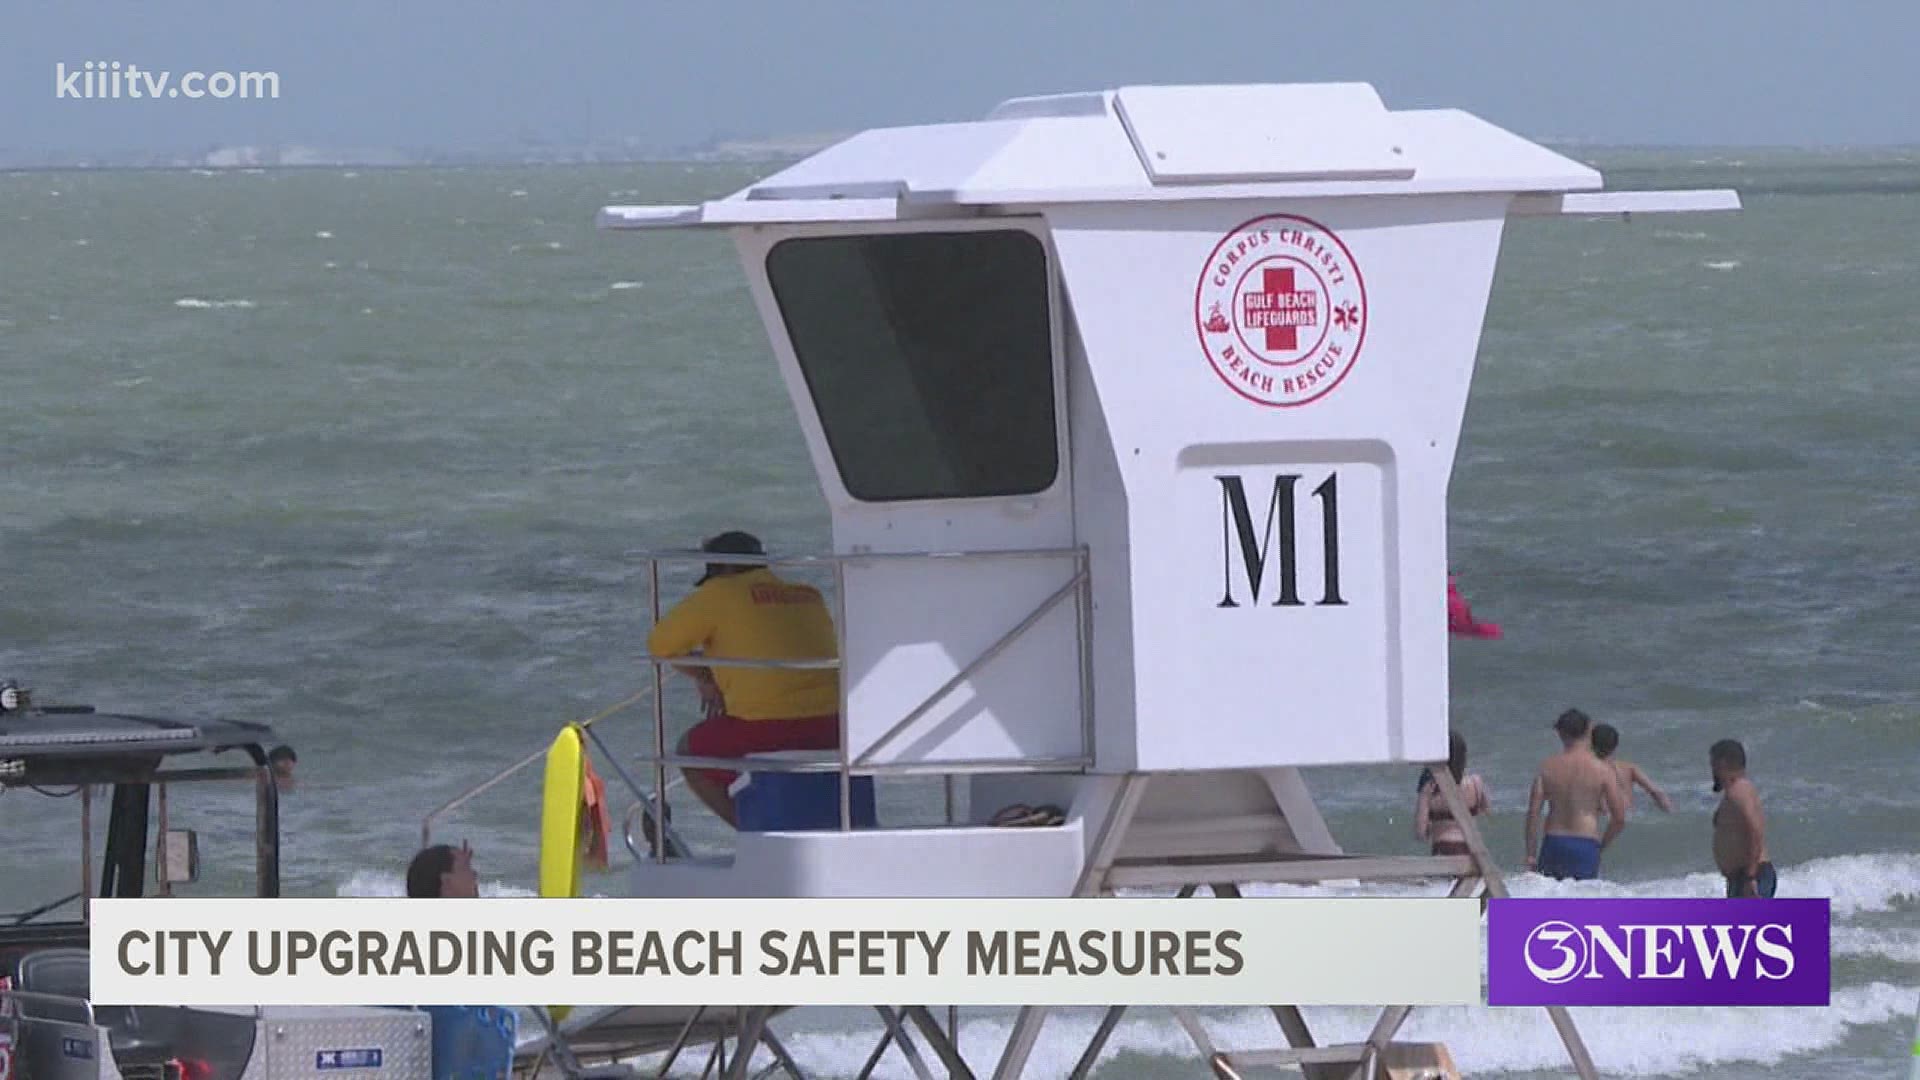 It's part of new legislation just signed into law to prevent drownings on the beach due to rip currents.